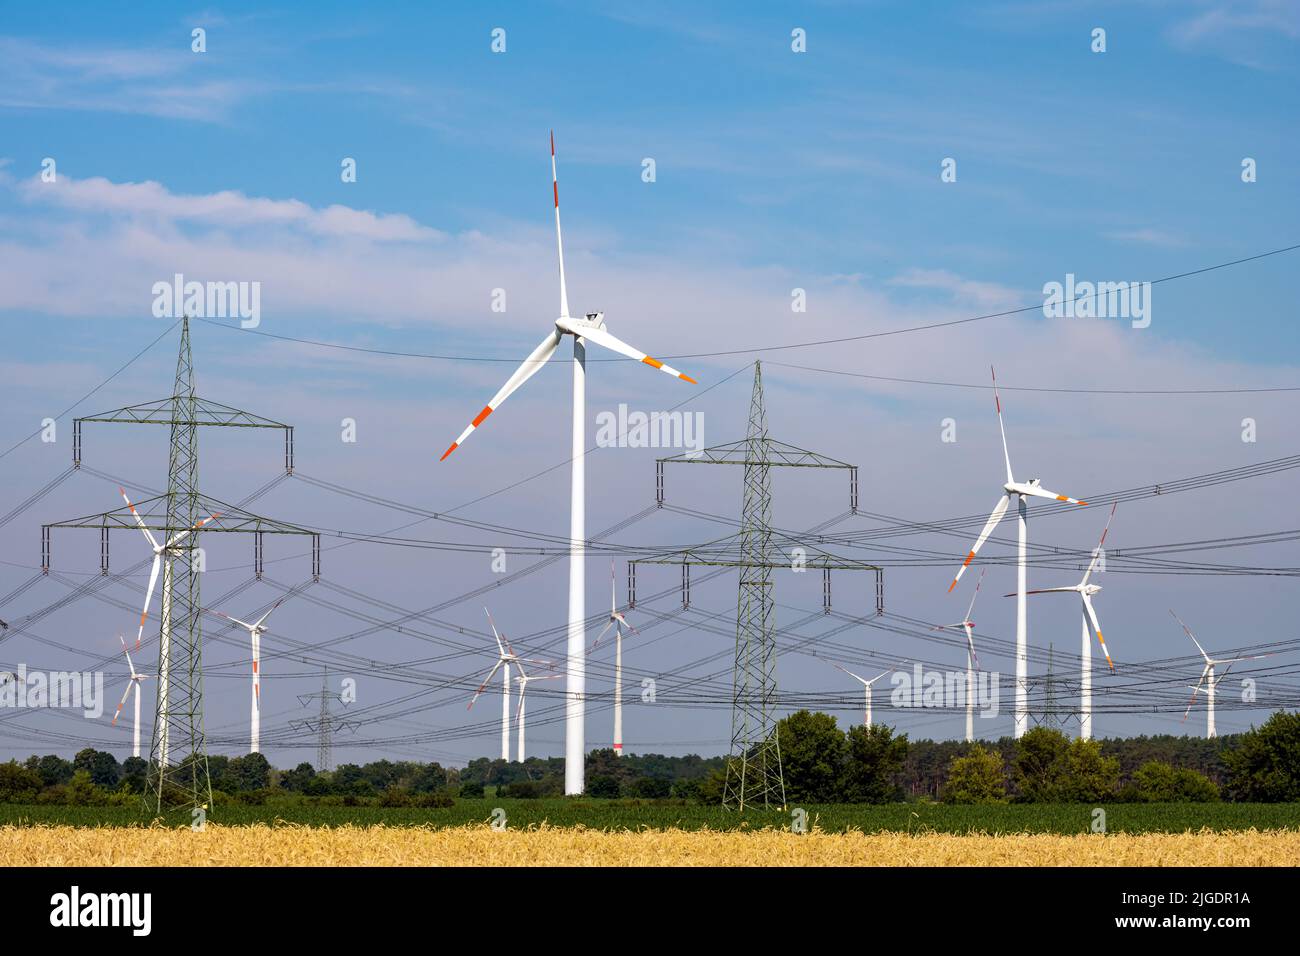 Various power lines and wind turbines seen in Germany Stock Photo